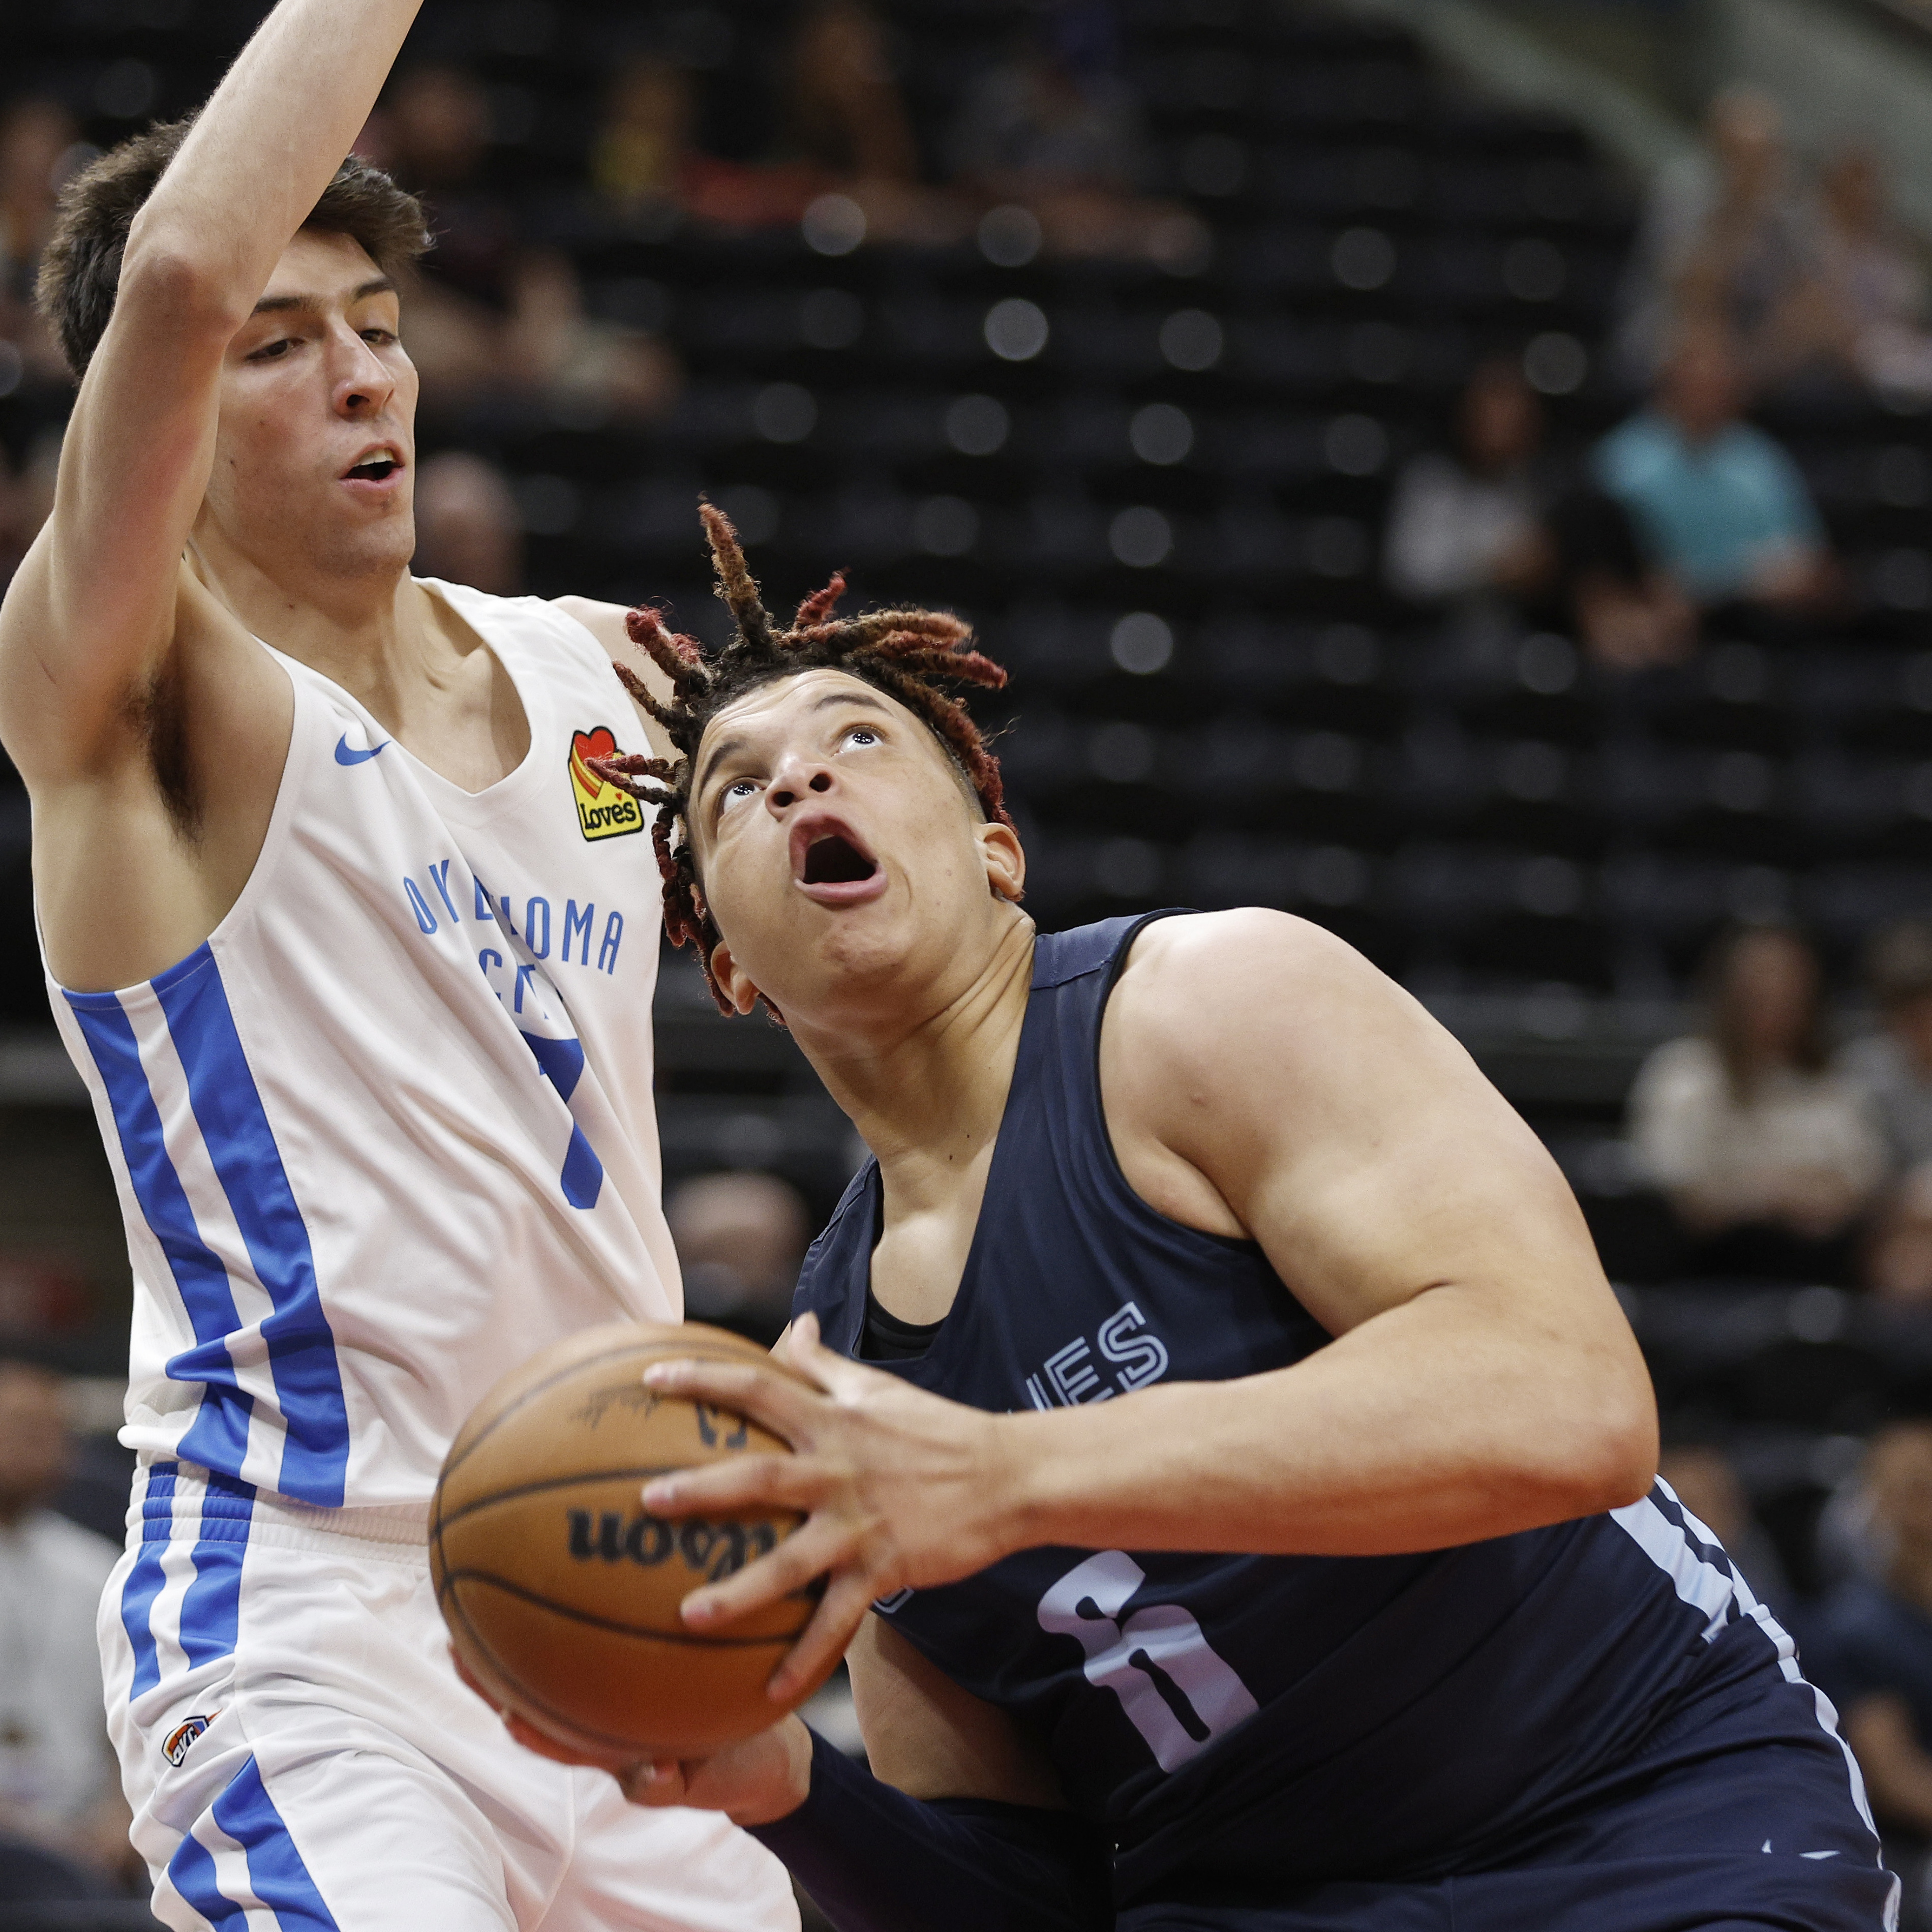 NBA Summer League 2022: Hot Takes About Chet Holmgren, Top Players from Utah Day 2